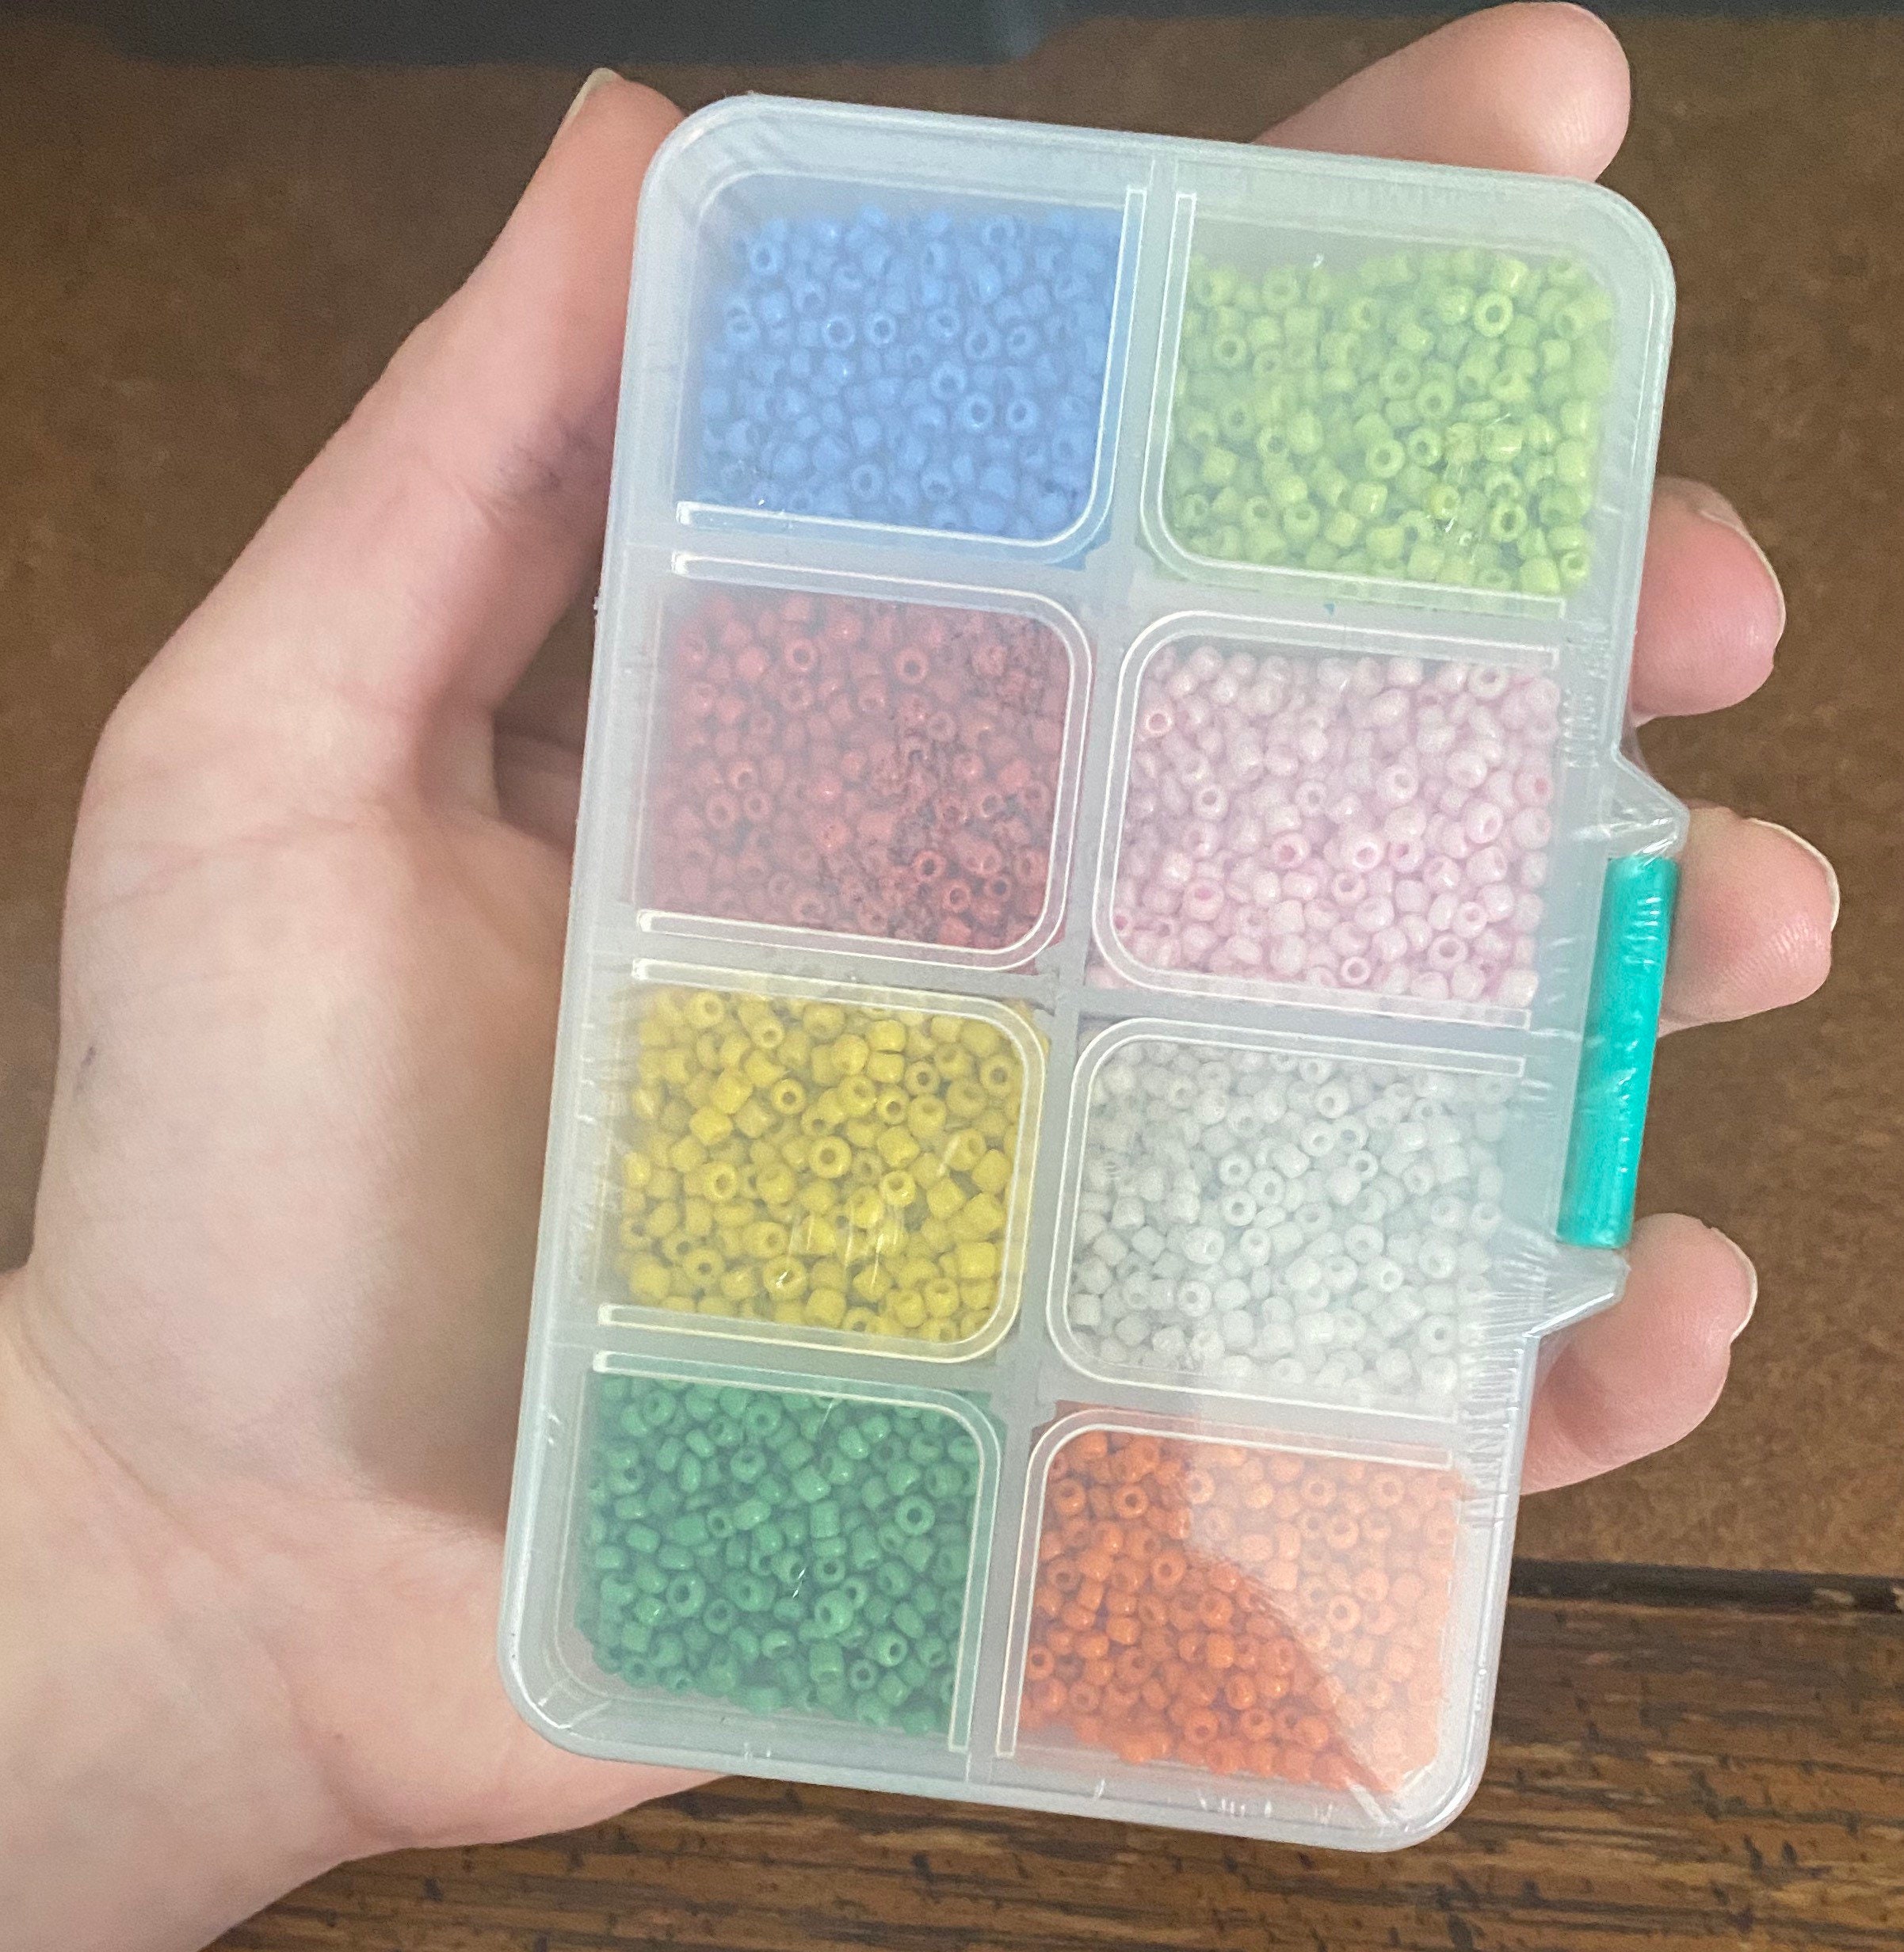 8 Color Glass Seed Bead Kit, Size 12/0, Opaque Colors, Reusable Storage  Container, Over 27,500 Total Beads, Seed Bead Lot, Bulk Seed Beads 